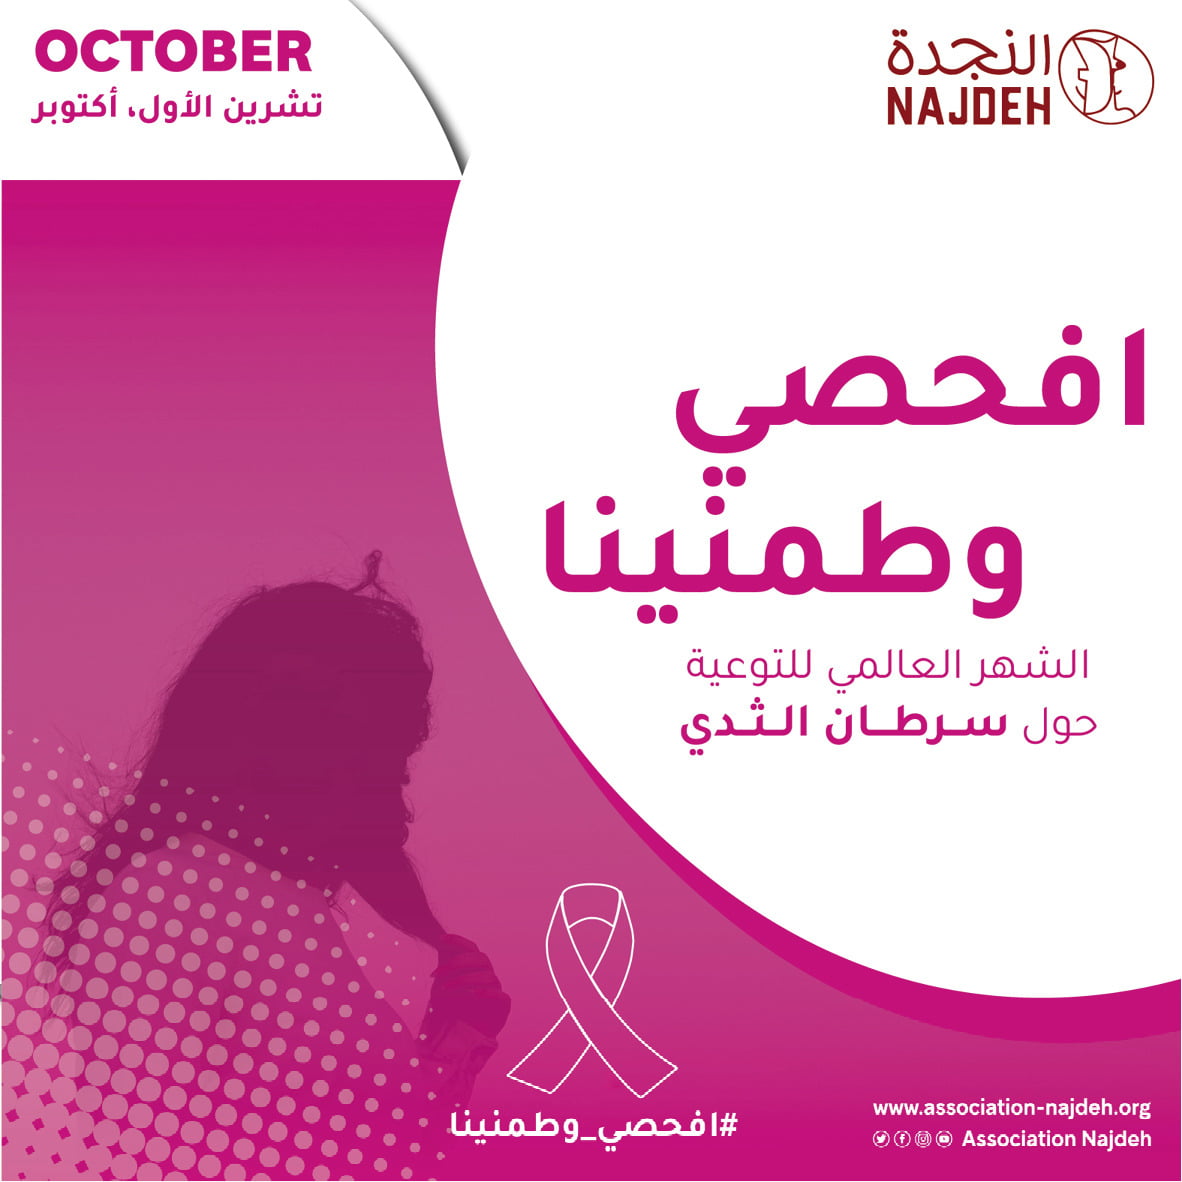 Check-ups to raise awareness for breast cancer.